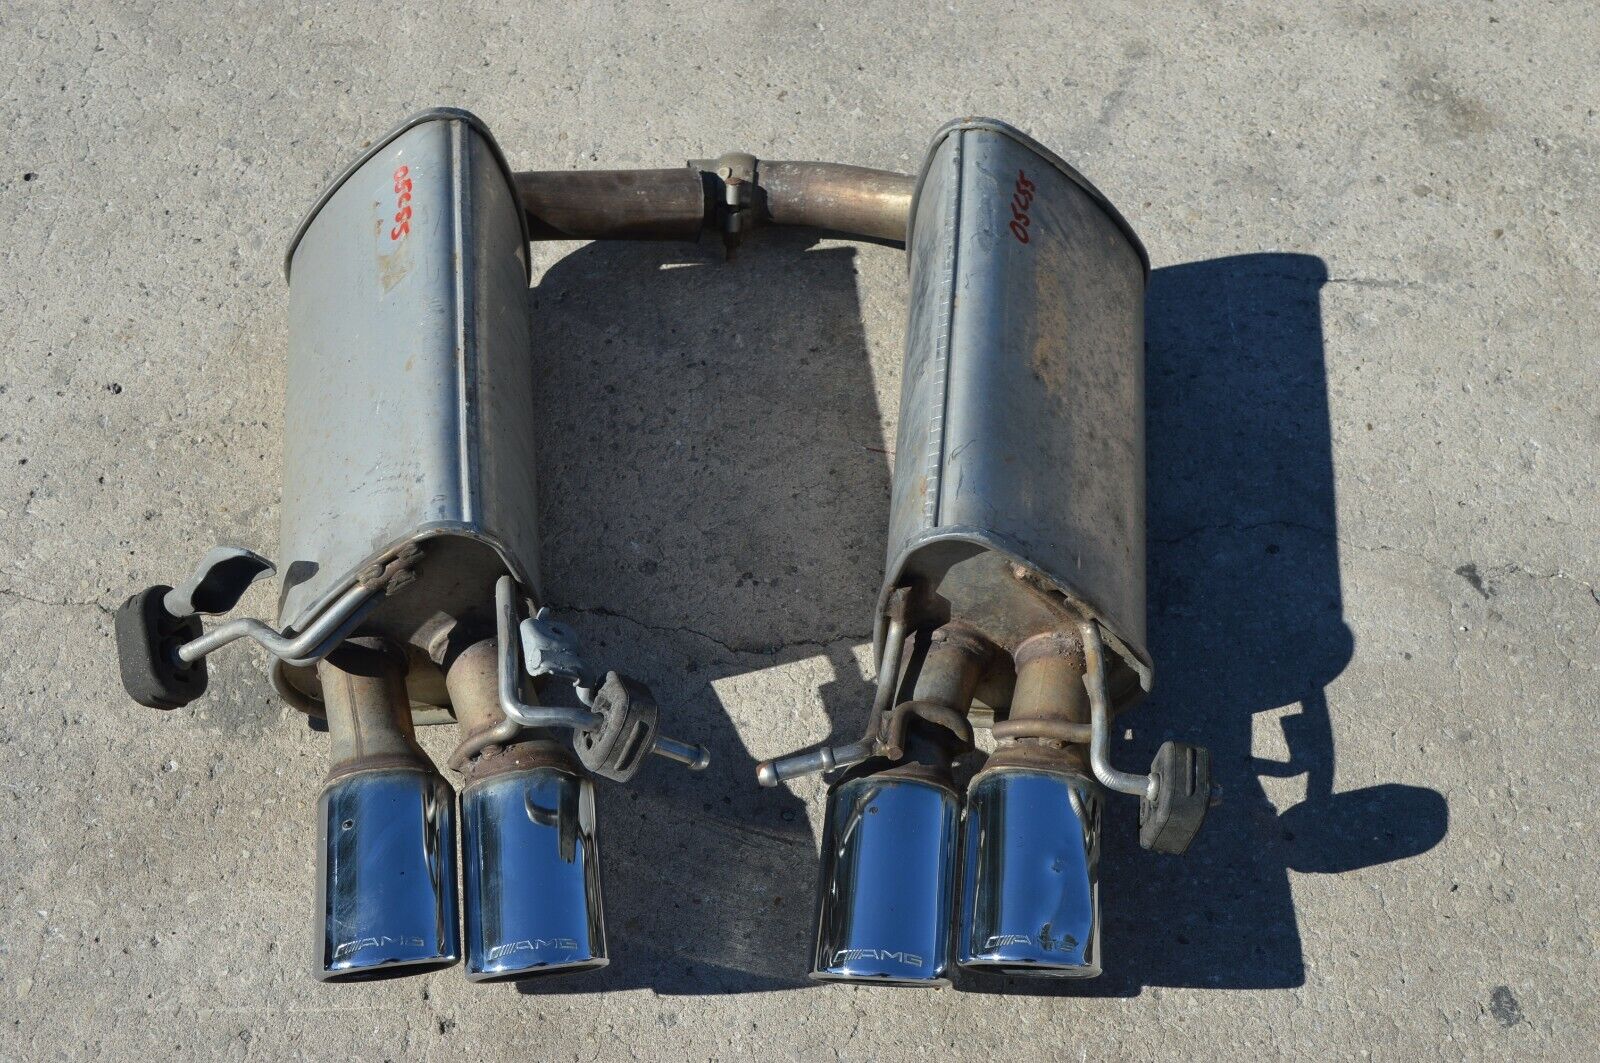 03-06 MERCEDES C55 AMG LEFT & RIGHT MUFFLERS MUFFLER EXHAUST WITH TIPS PAIR OEM